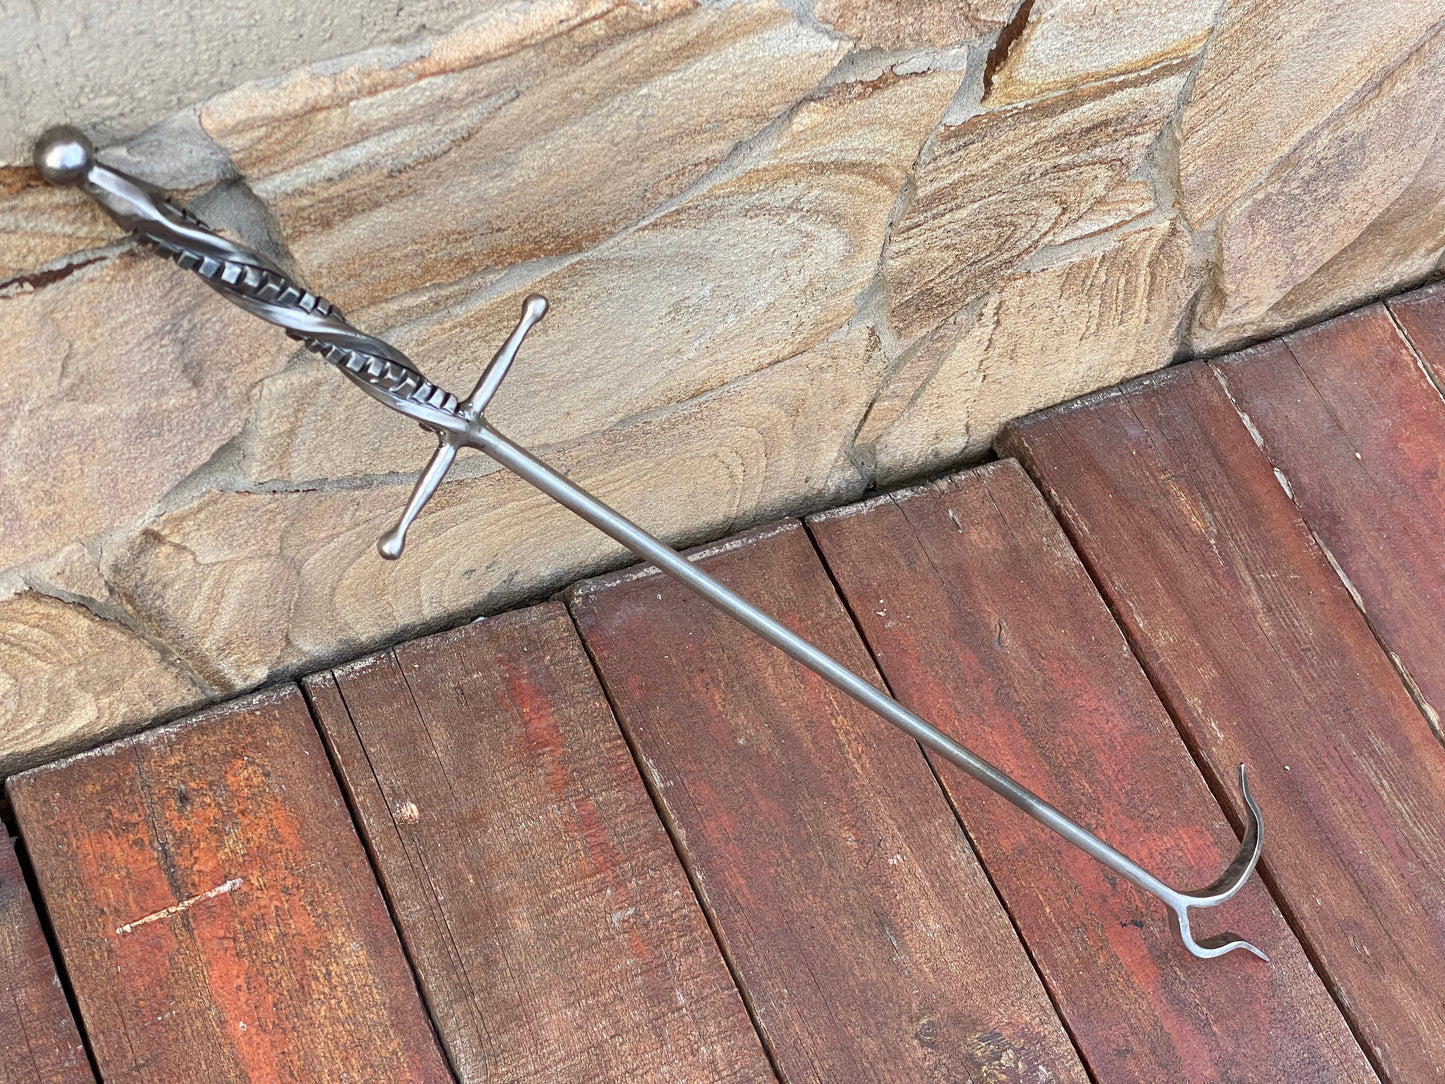 Stainless steel fire poker, fire poker, Christmas, birthday, BBQ, fireplace, firewood holder, personalized gift,mens gift,engagement,wedding